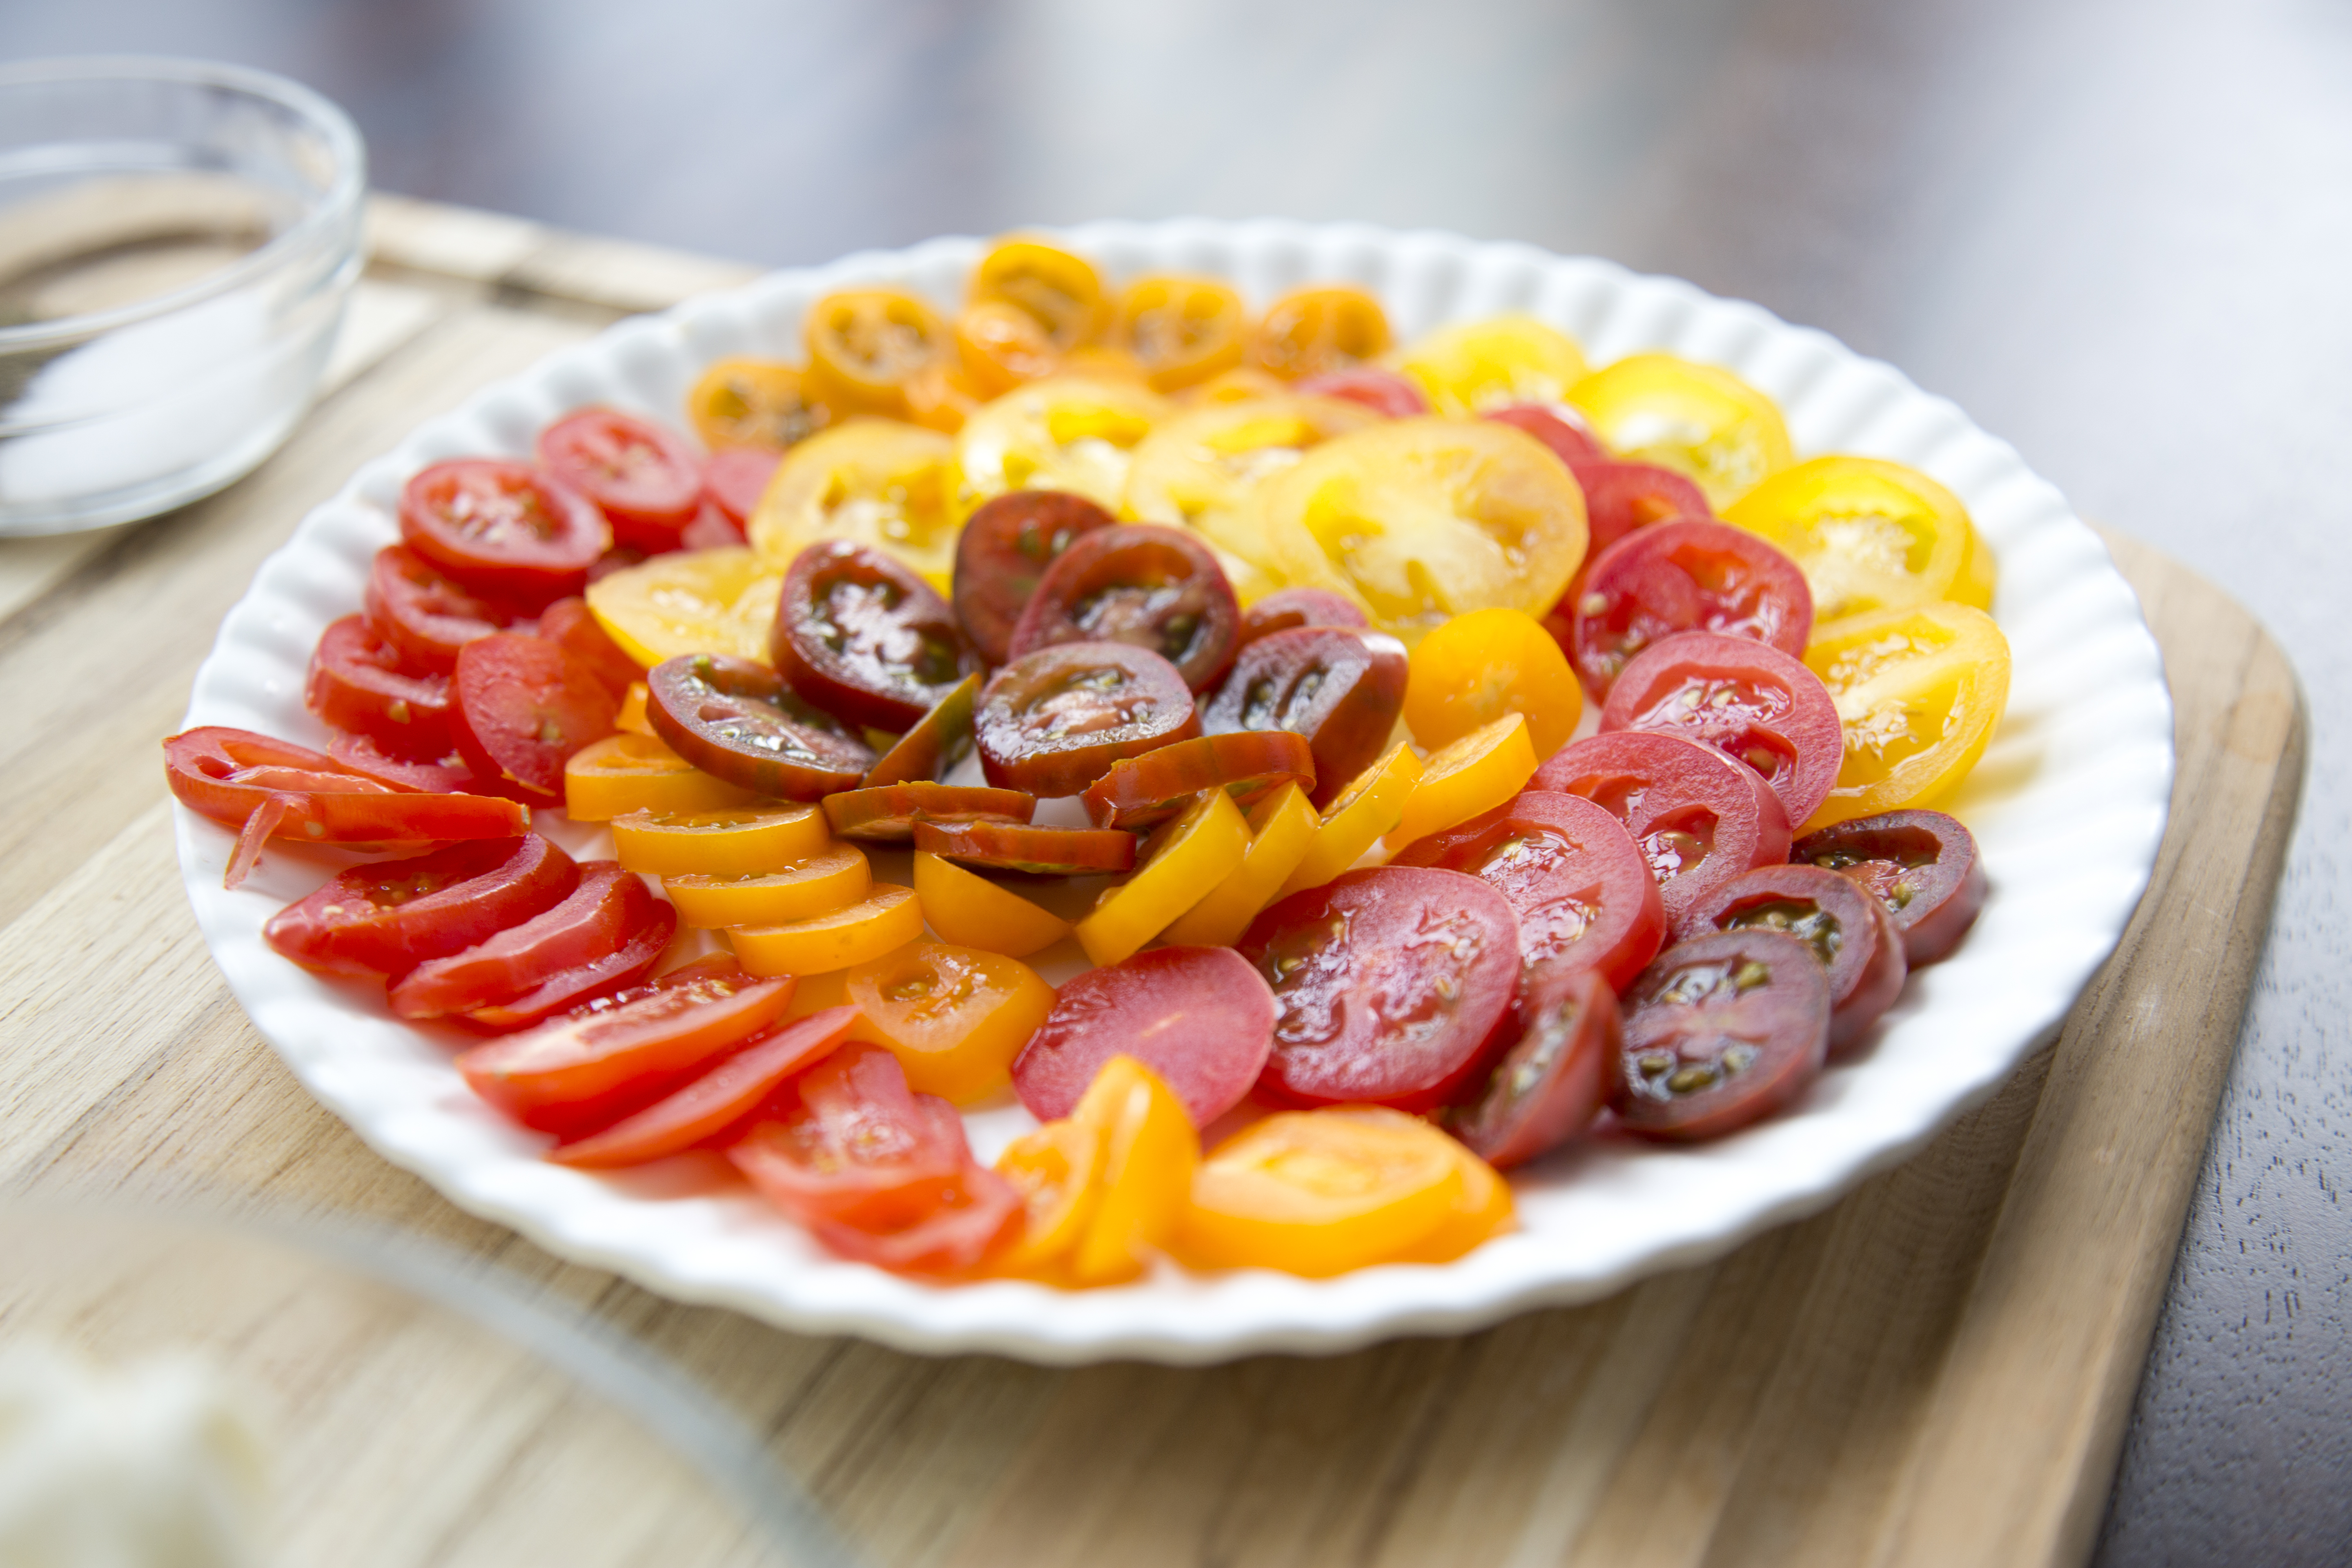 Heirloom tomatoes come in a variety of colors like red, orange and purple. 